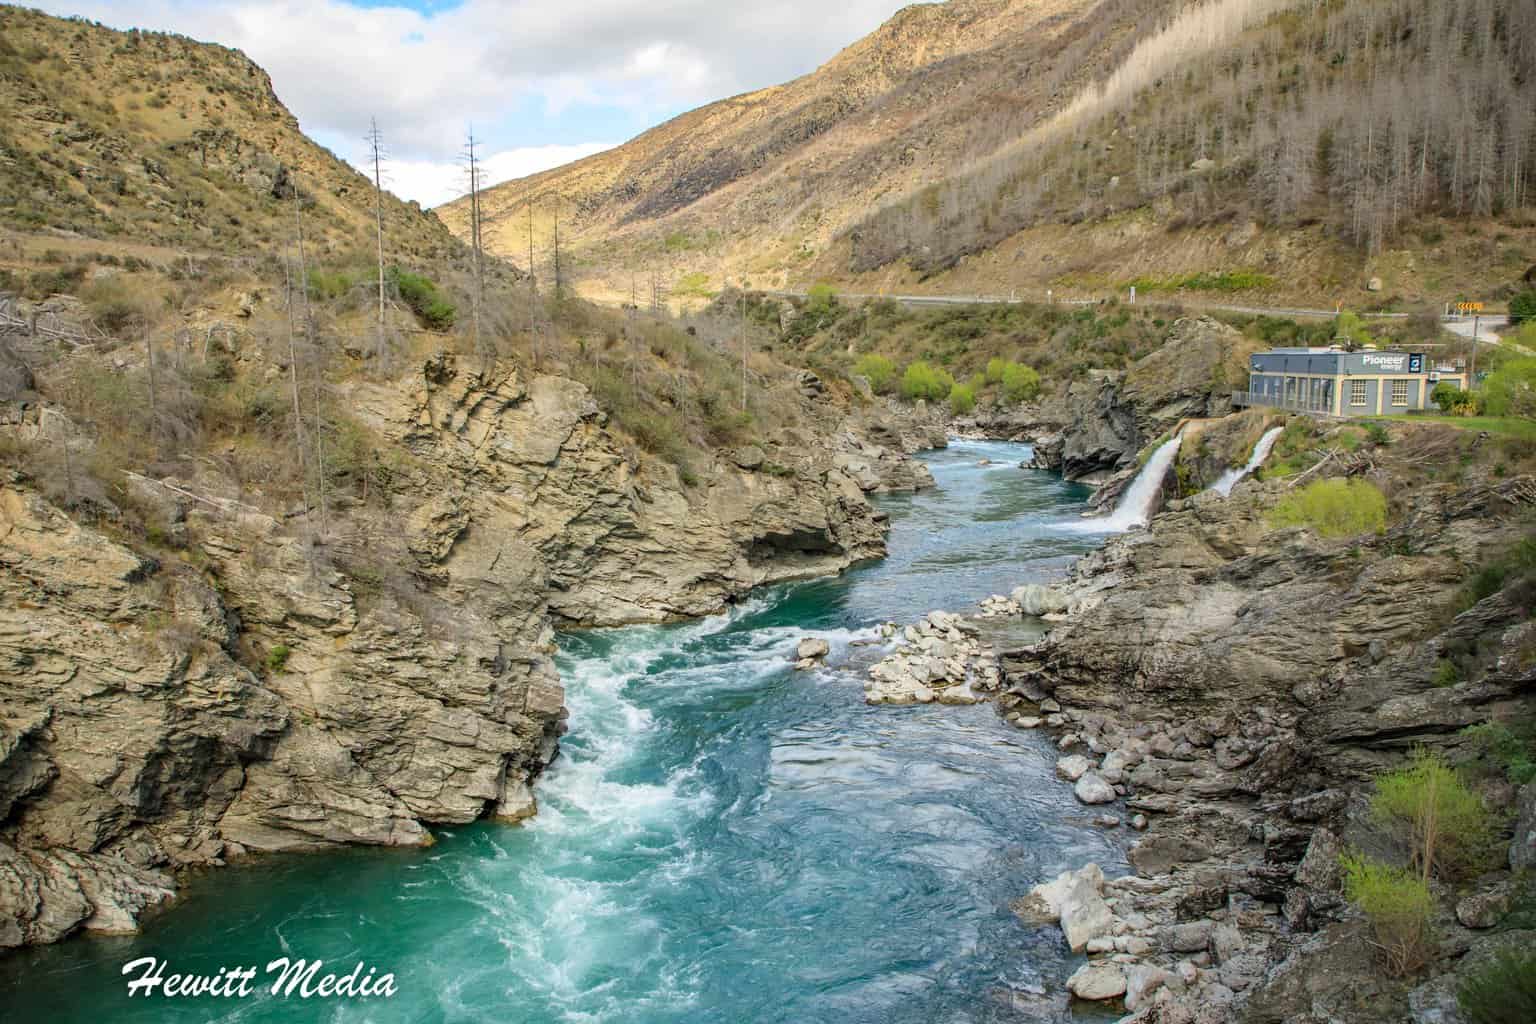 Central Otago Other Attractions - The Roaring Meg